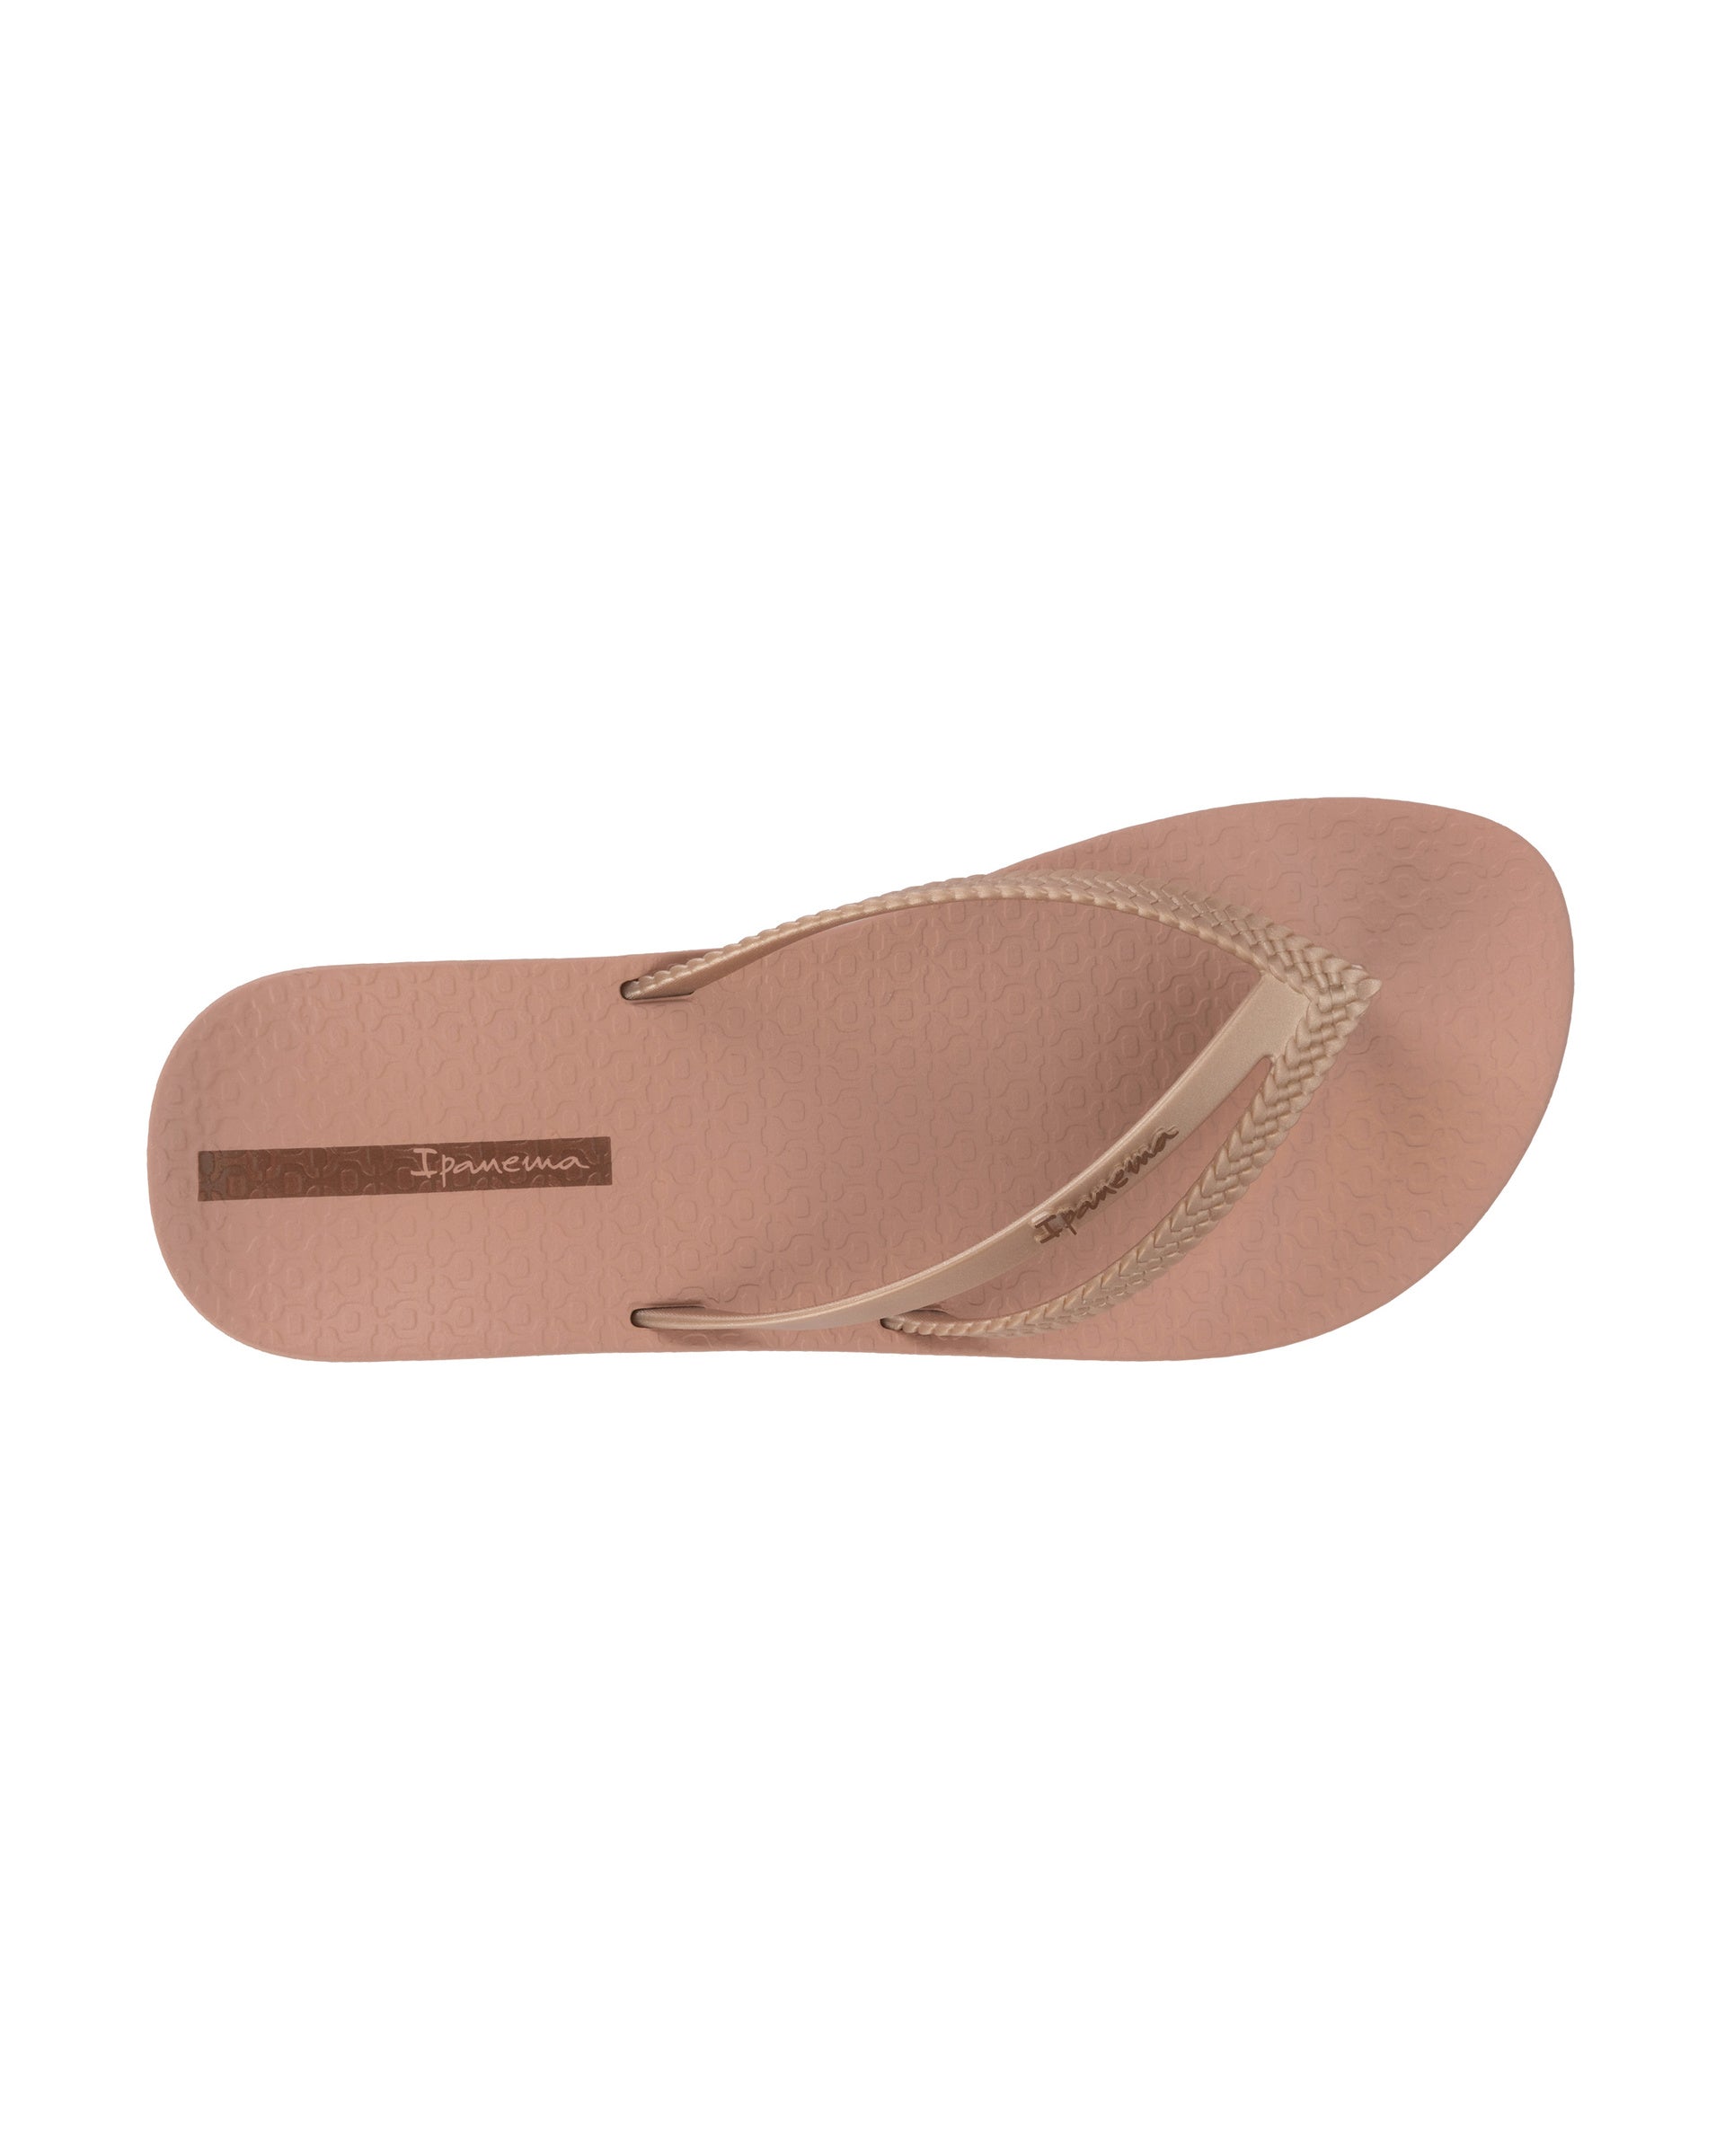 Top view of a pink Ipanema Bossa Soft women's flip flop with metallic rose gold straps.